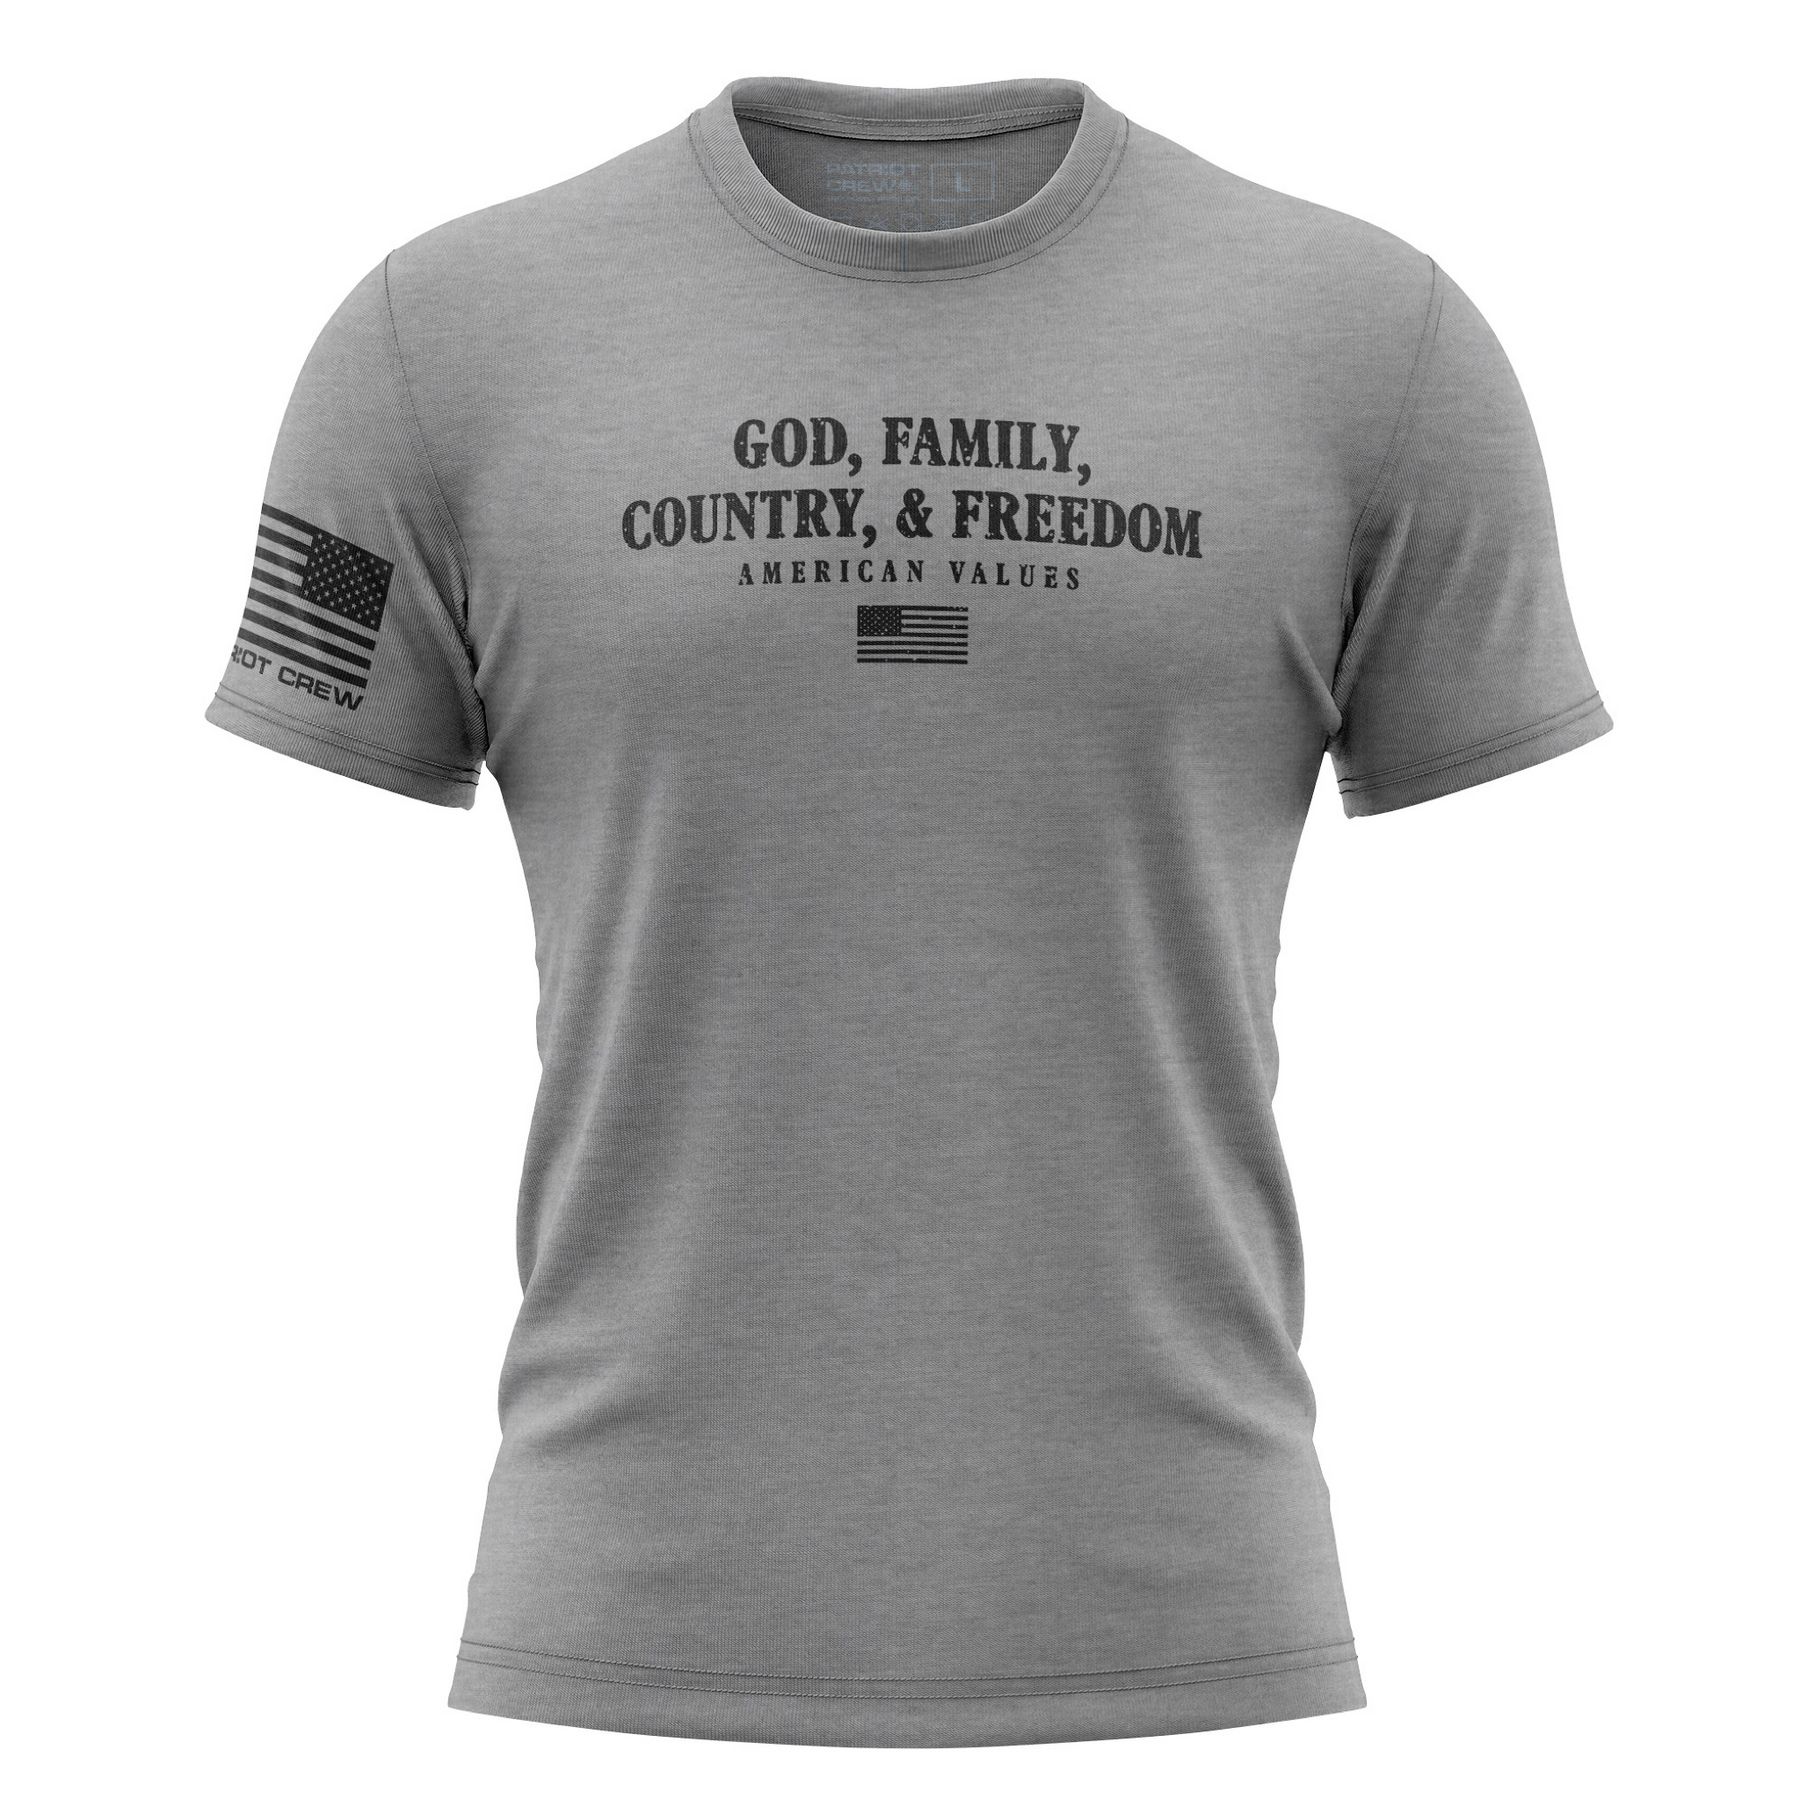 God, Family, Country, & Freedom T-Shirt